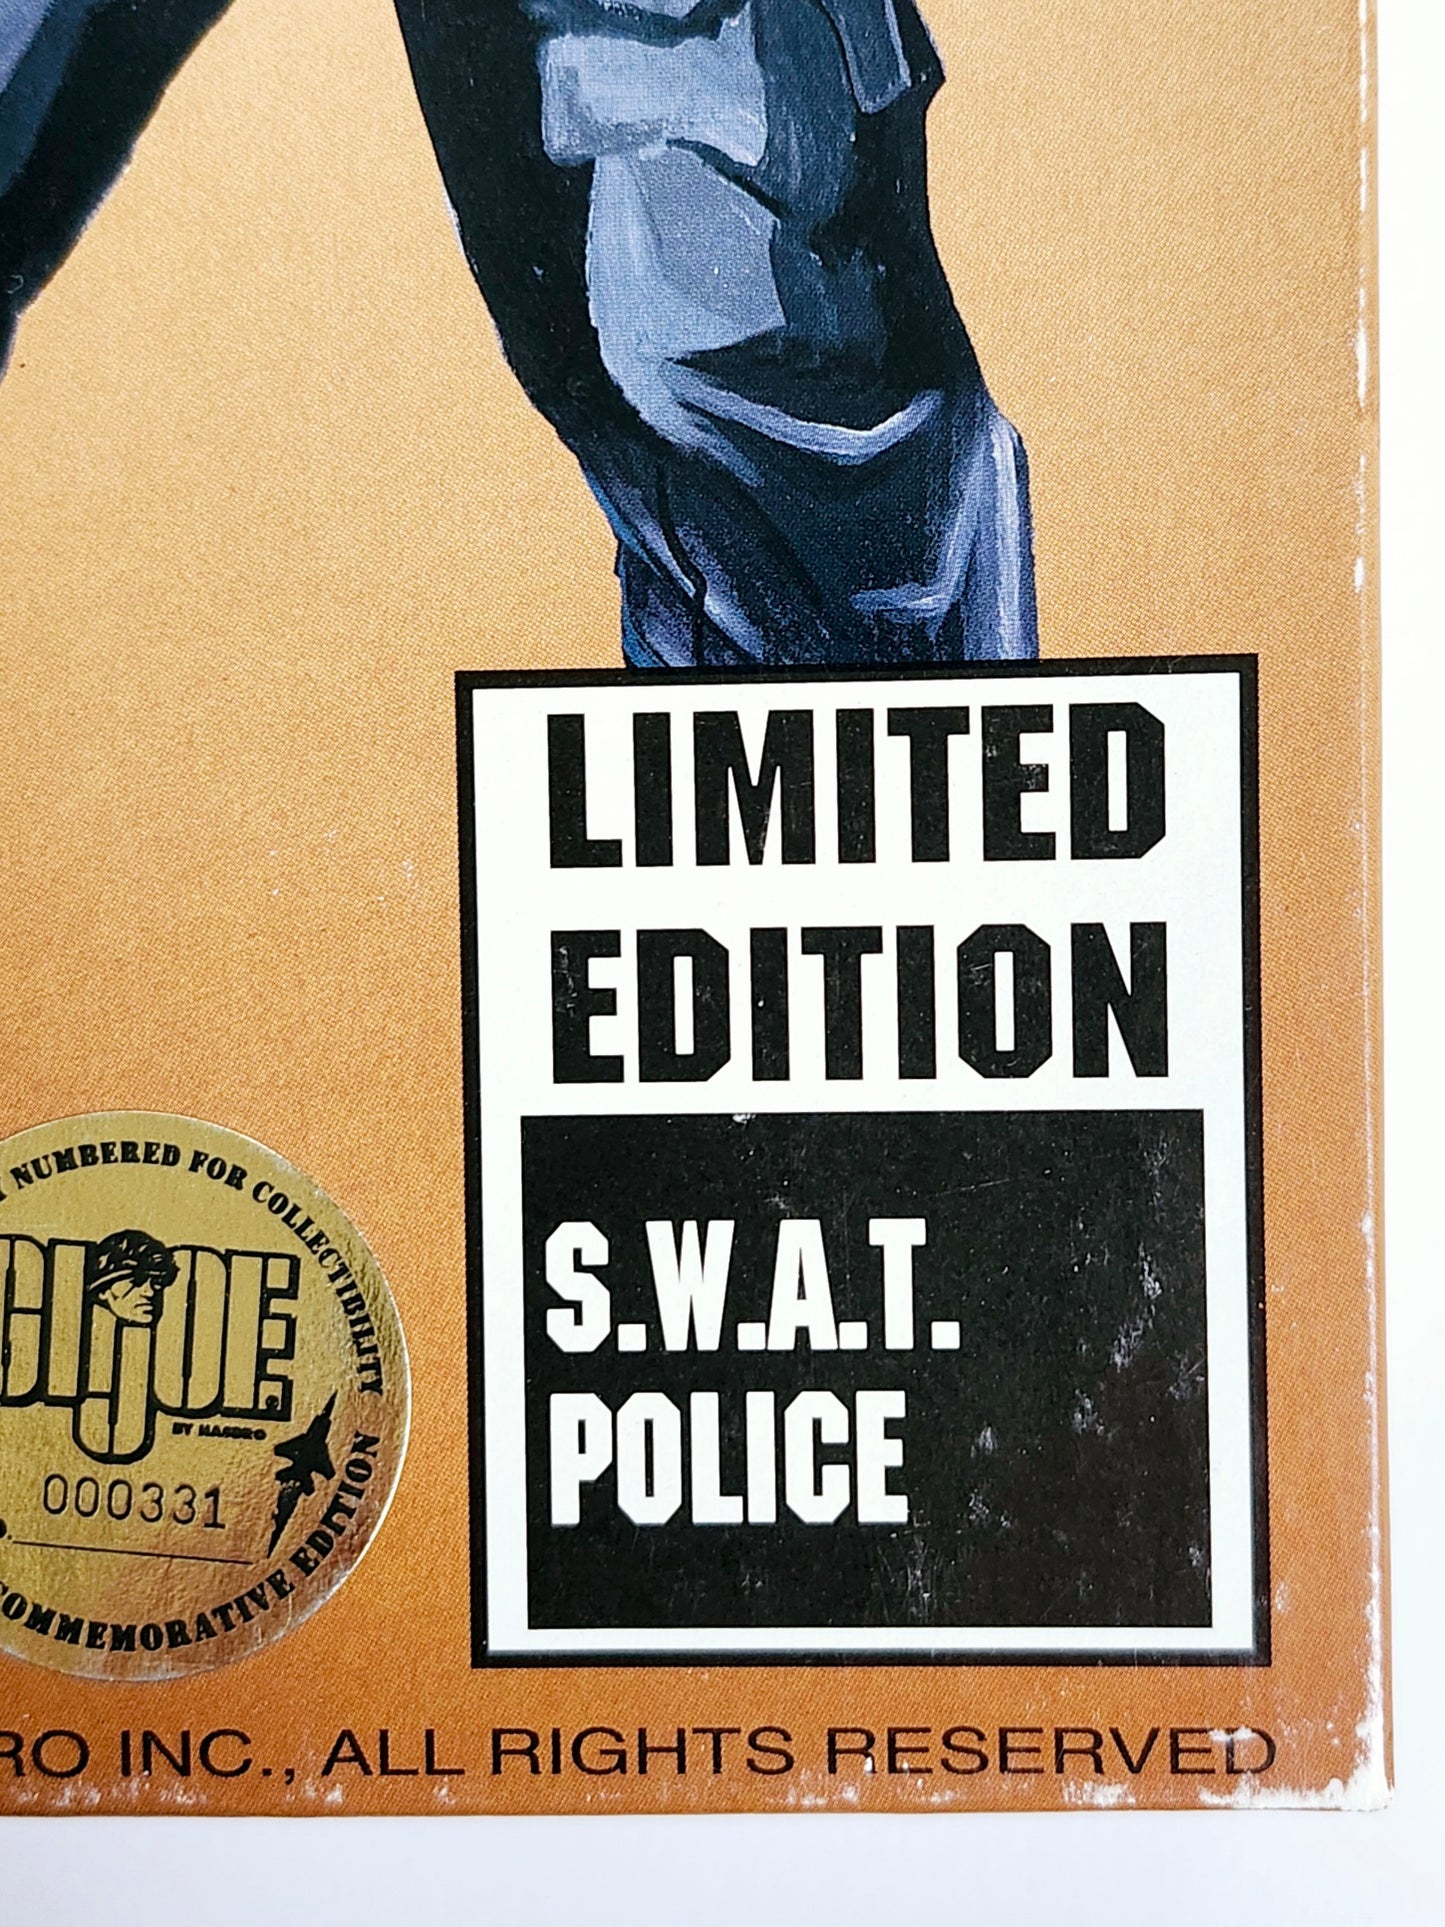 1995 International Collectors Convention G.I. Joe S.W.A.T. Police 12-Inch Action Figure